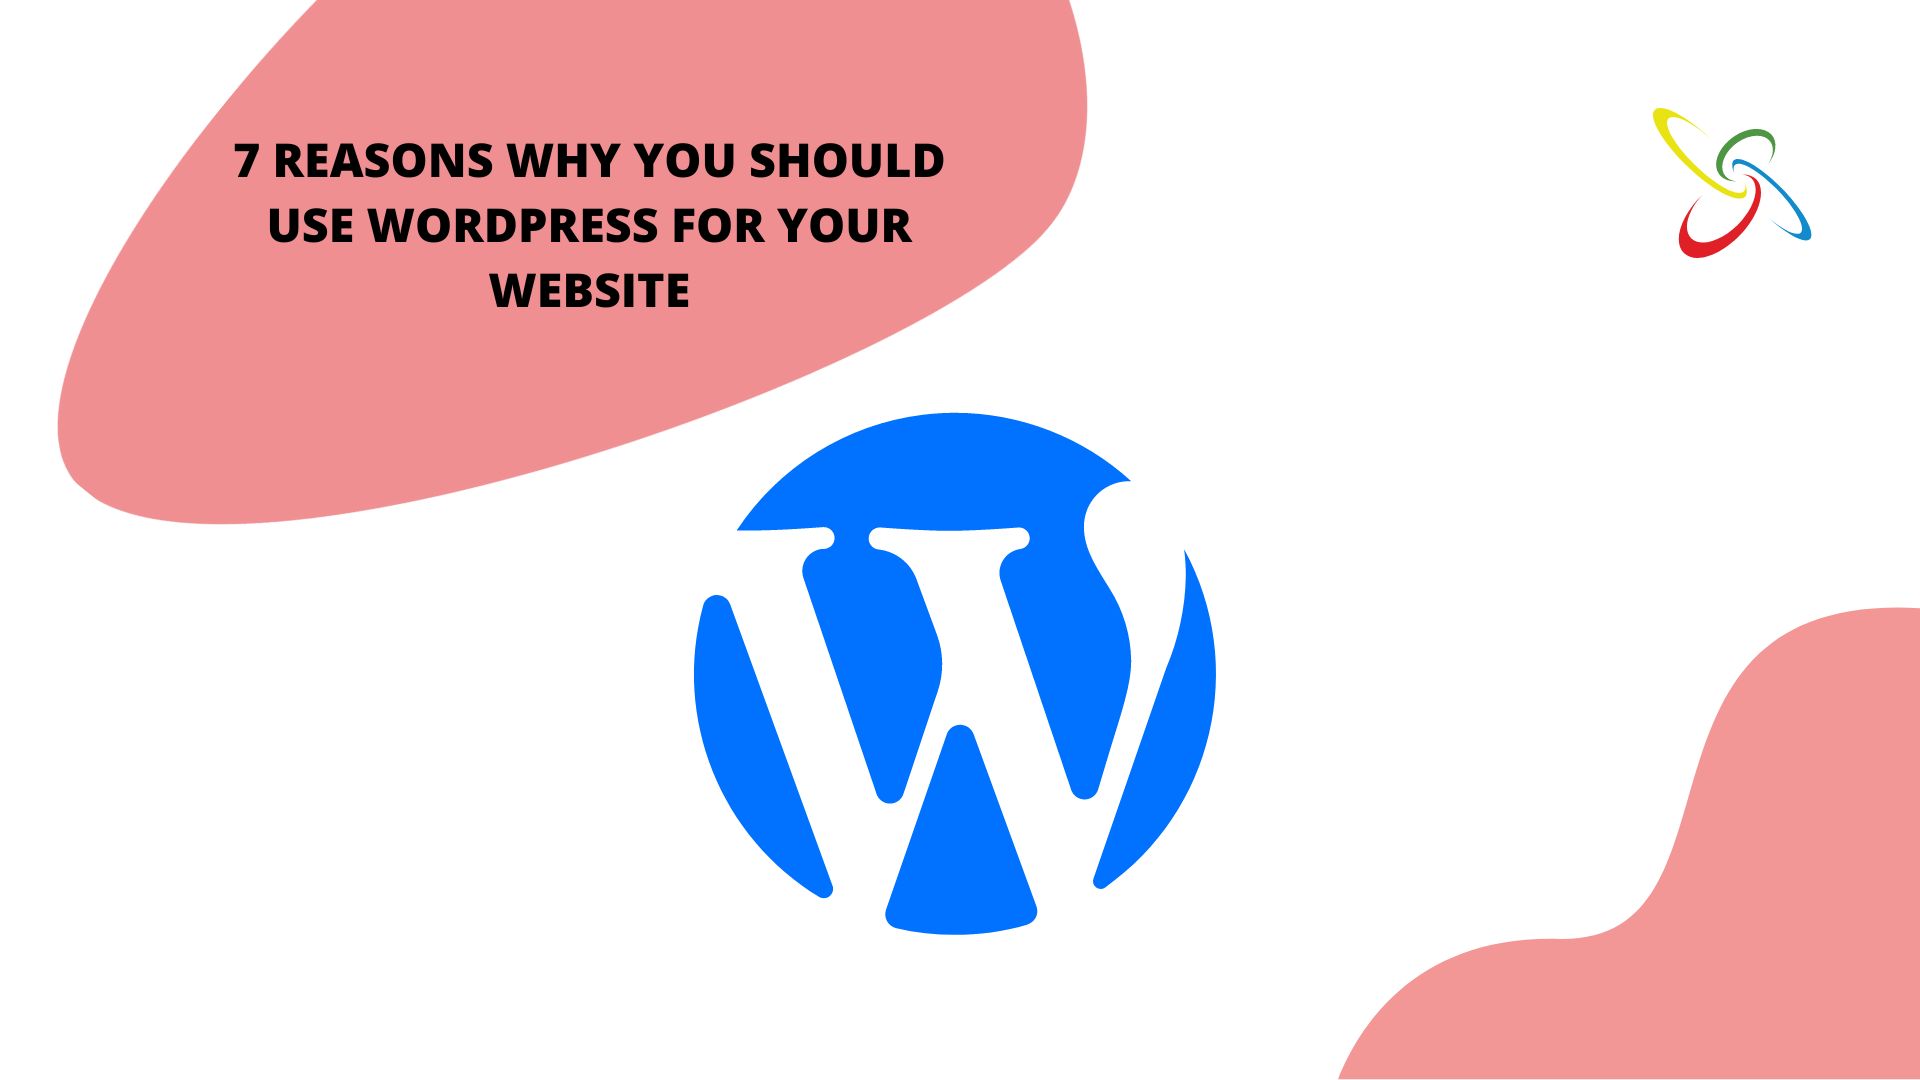 7 reasons why you should use WordPress for your website